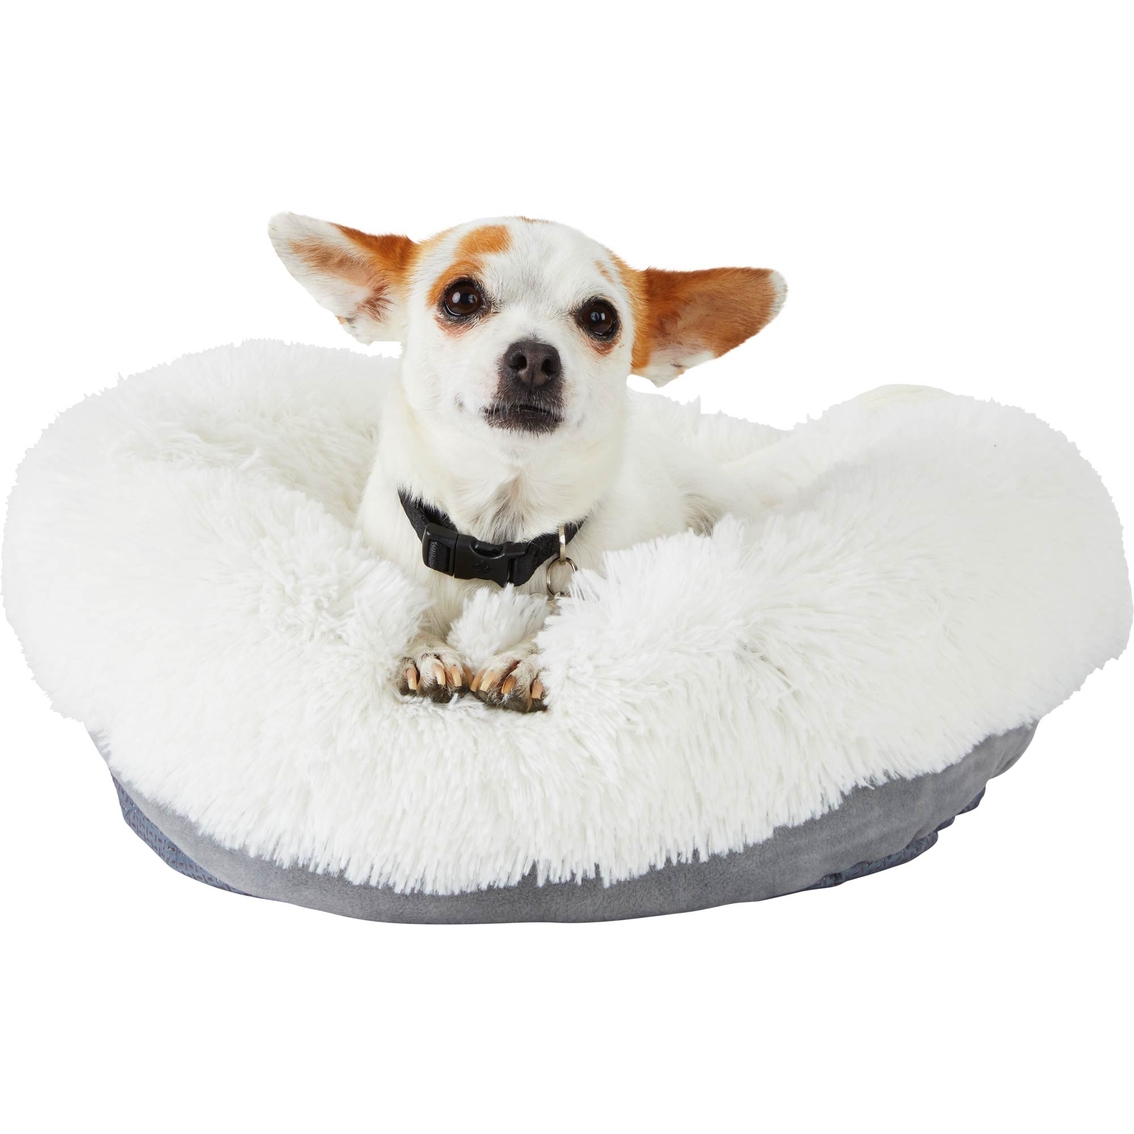 EveryYay Snooze Fest Cream Donut Bed for Dogs, 18 in. L x 18 in. W x 10 in. H - Image 2 of 3